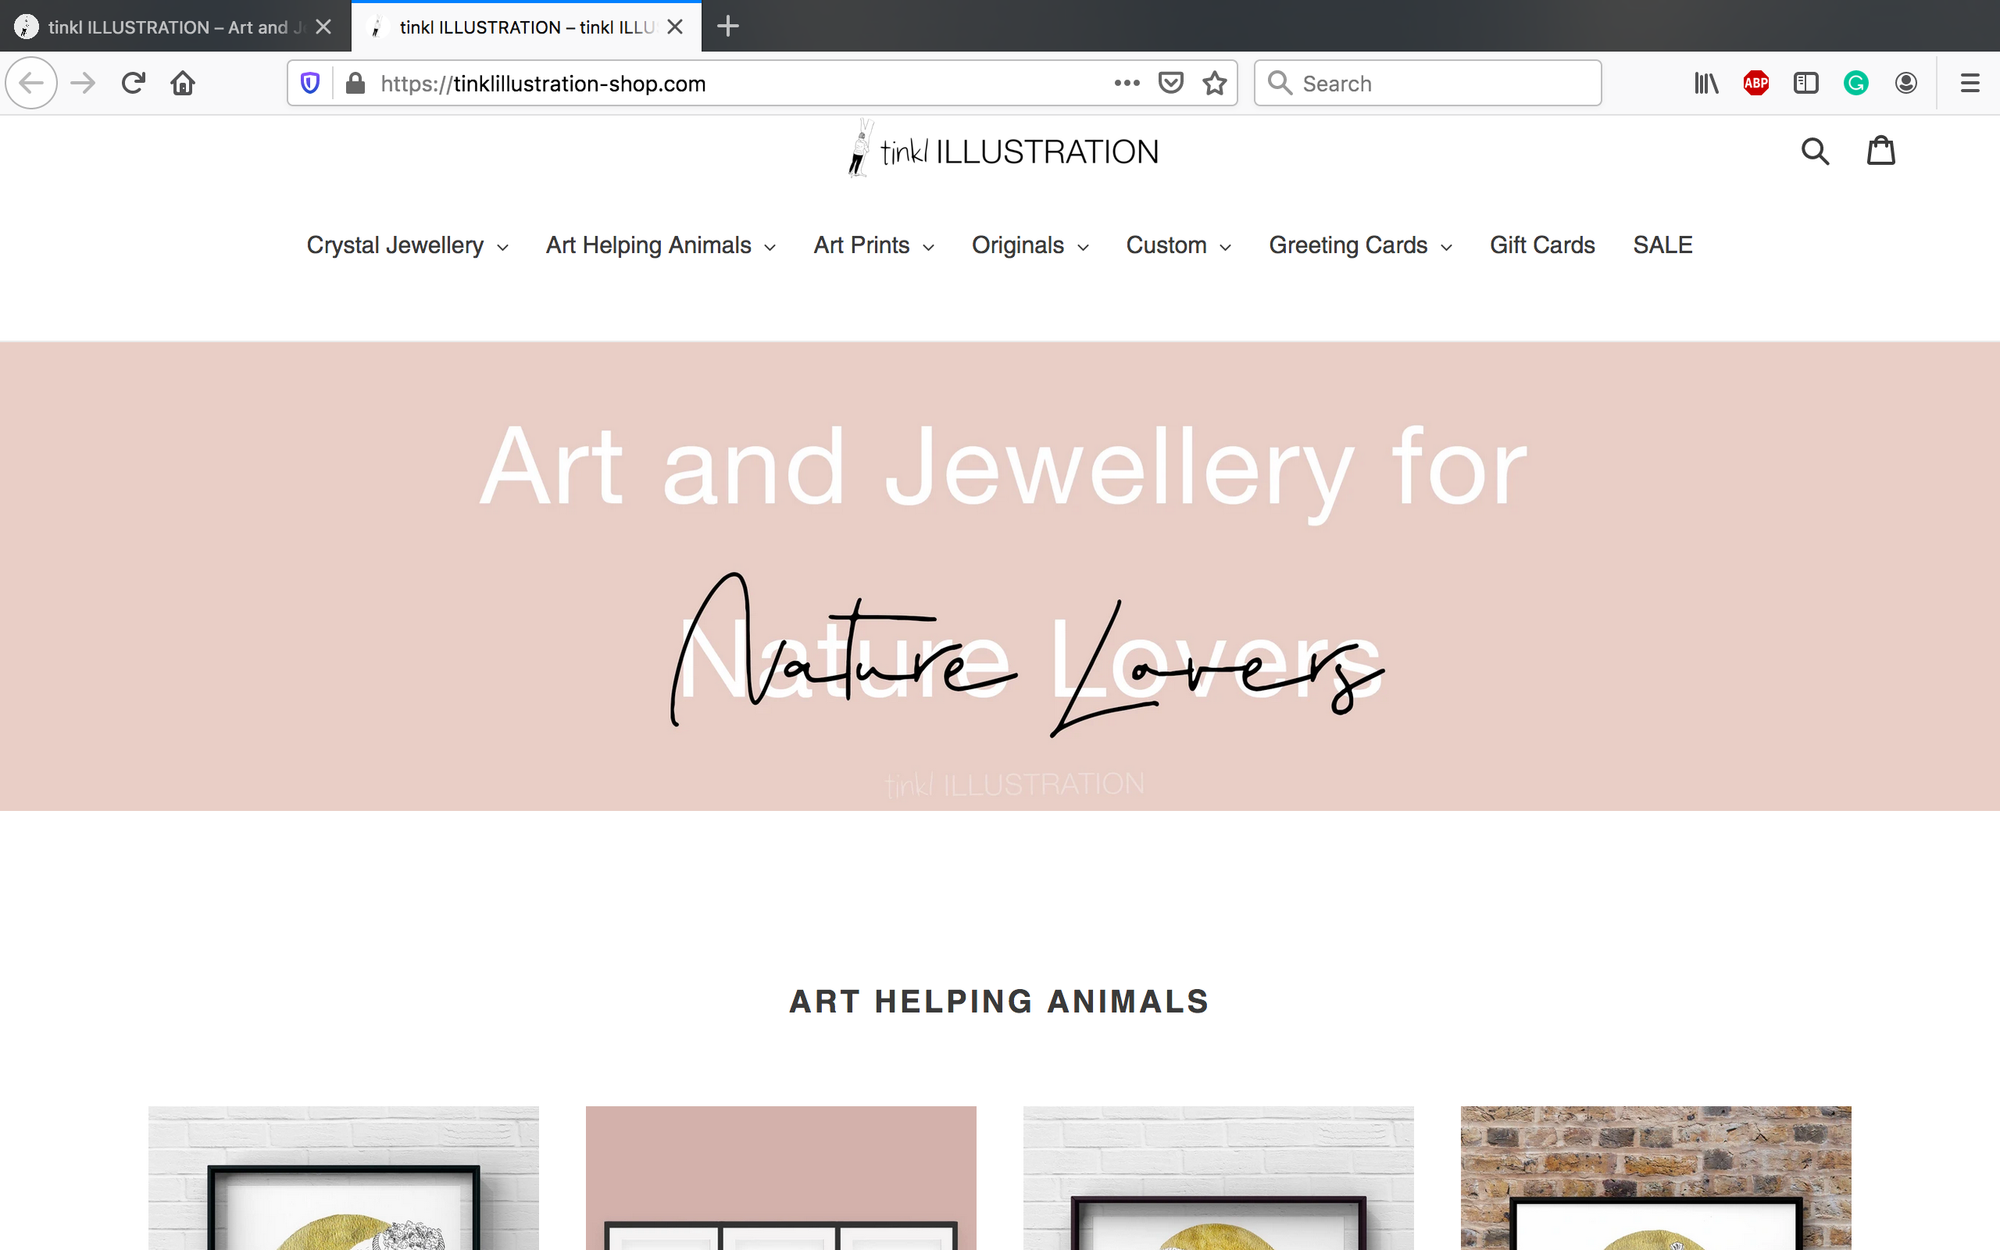 Website Layout and Banner